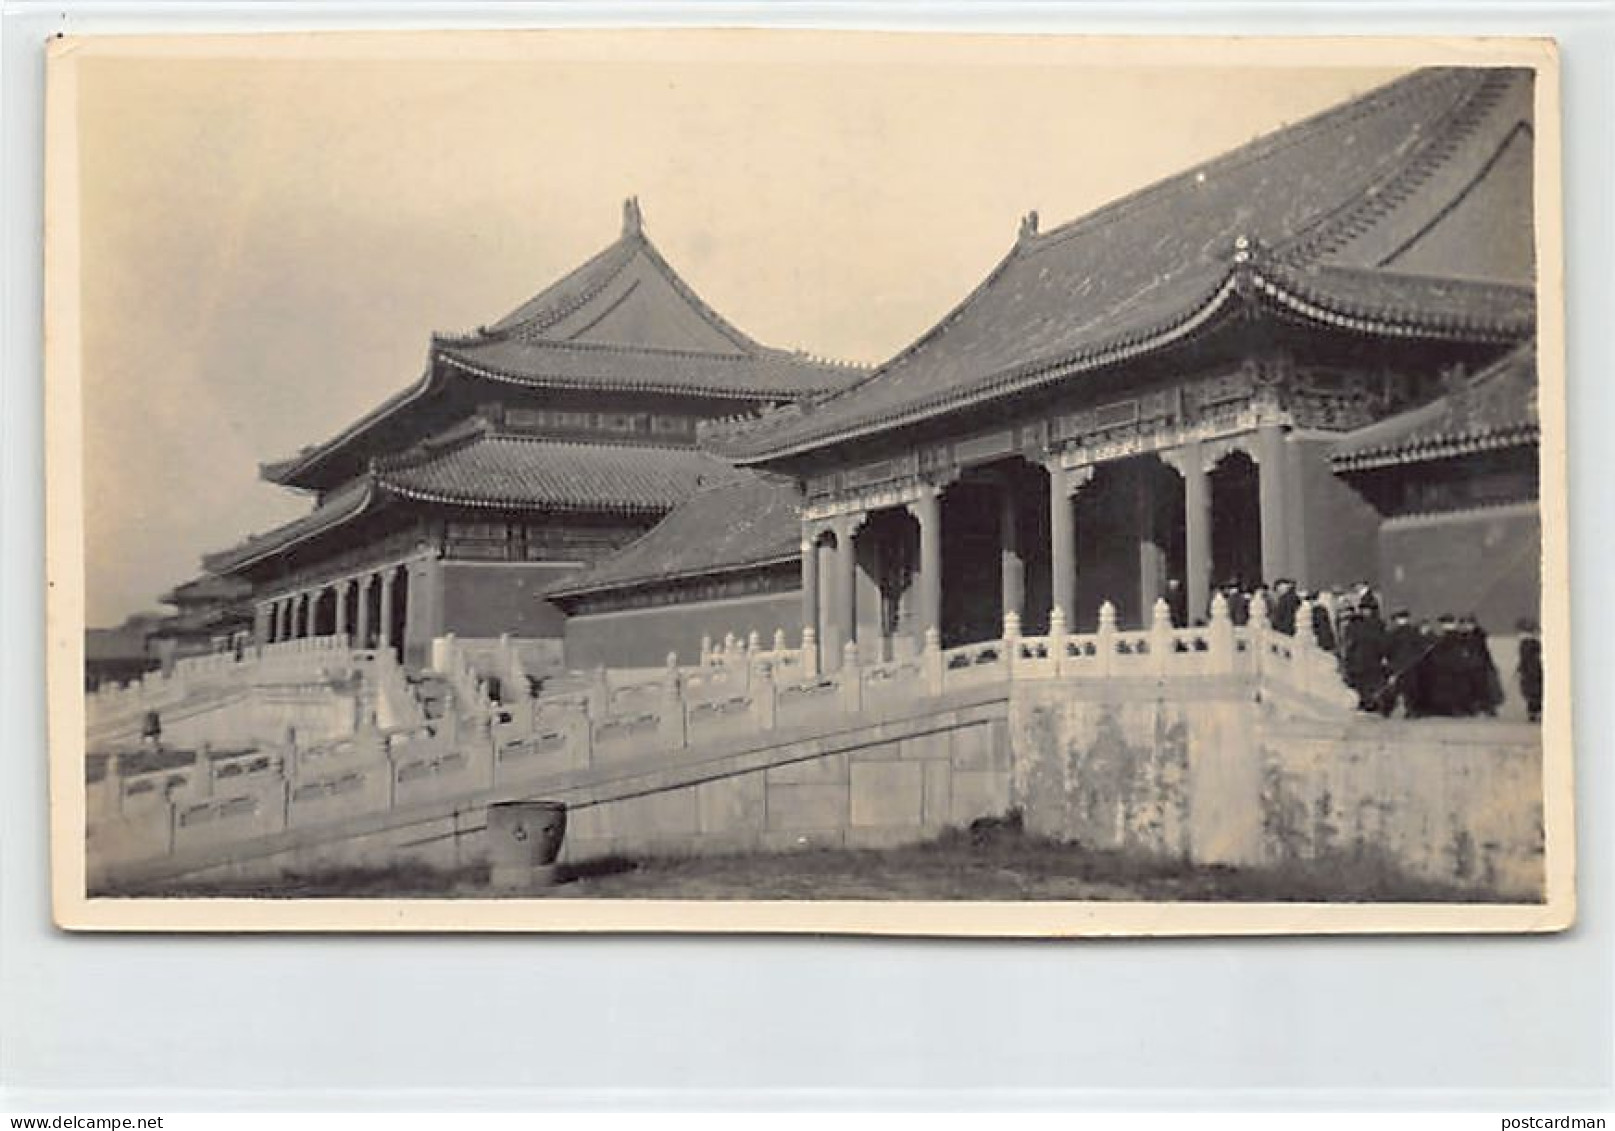 China - BEIJING - The Bridges And Entrance Of The Ancient Imperial Palaces - PHOTOGRAPH - Publ. Unknown  - Chine